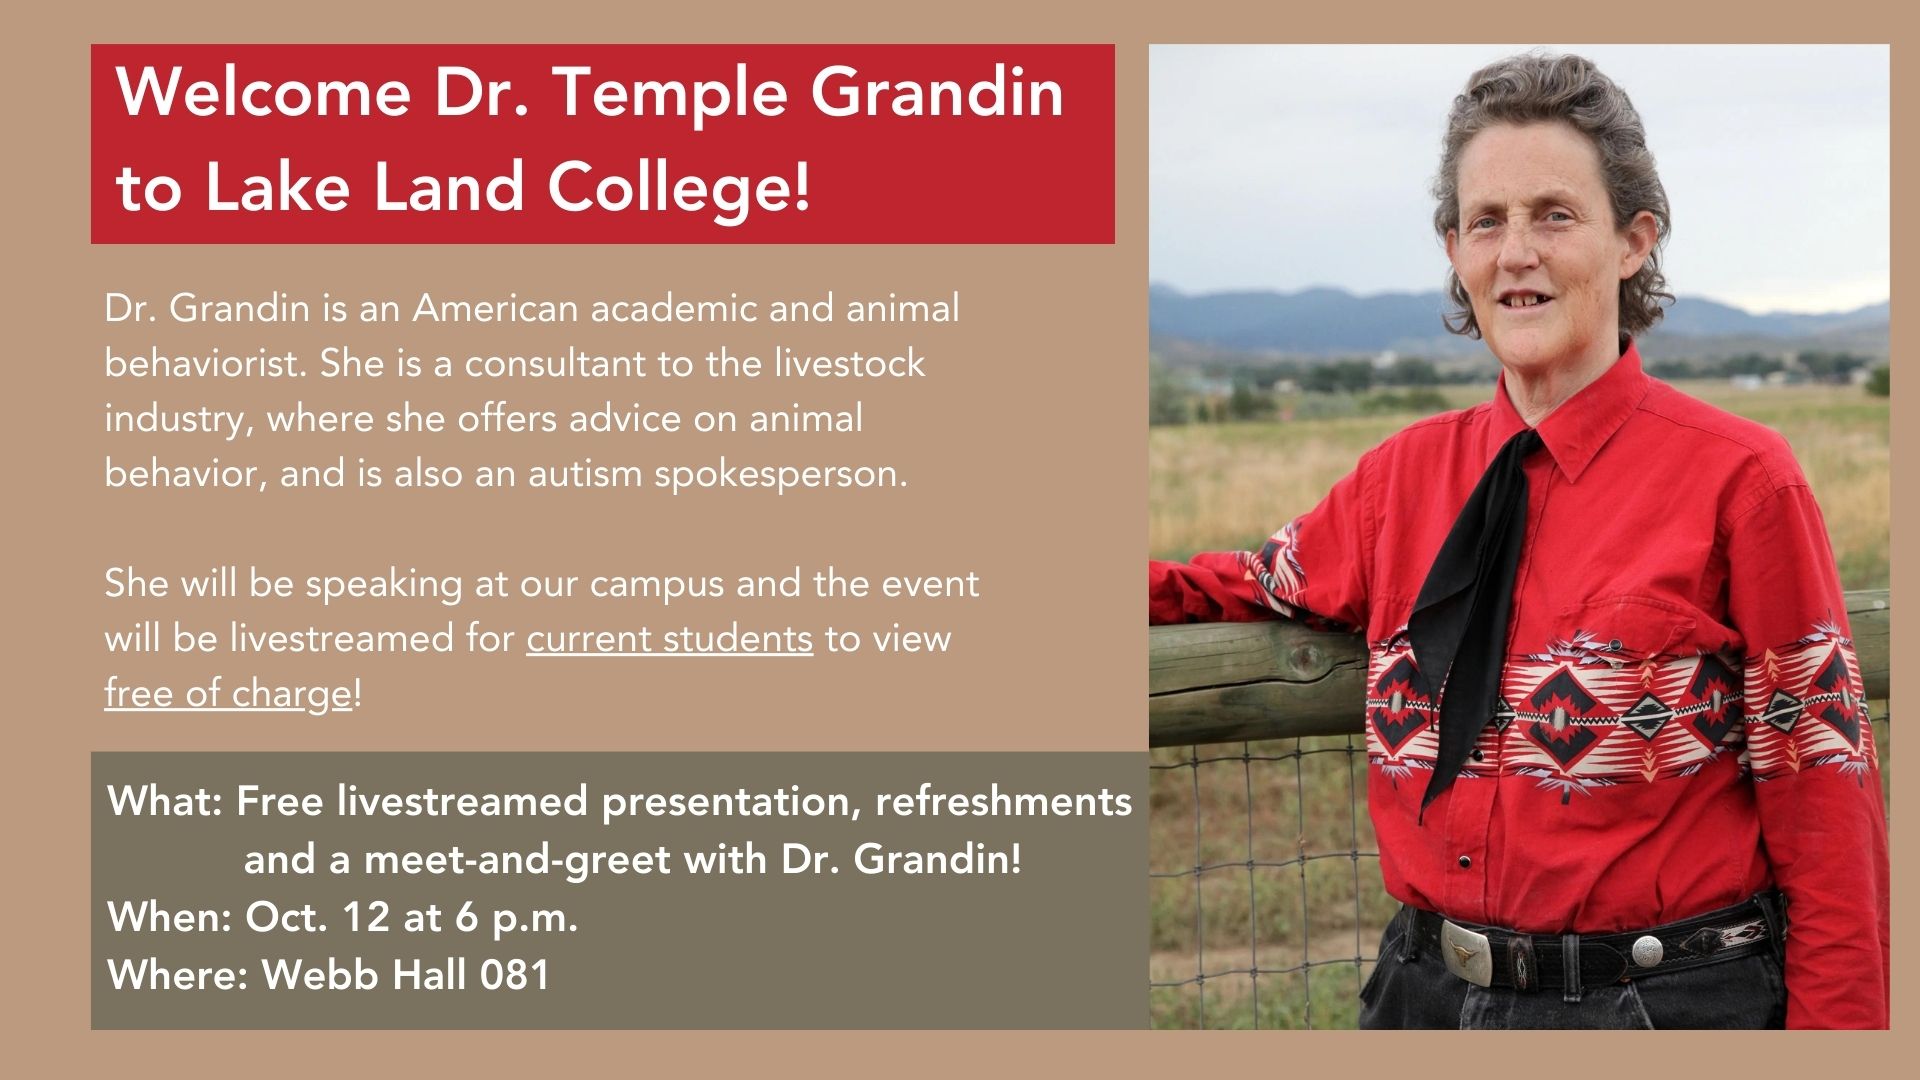 Welcome Dr. Temple Grandin to Lake Land College on October 12 at 6 p.m. in Webb Hall, room 081